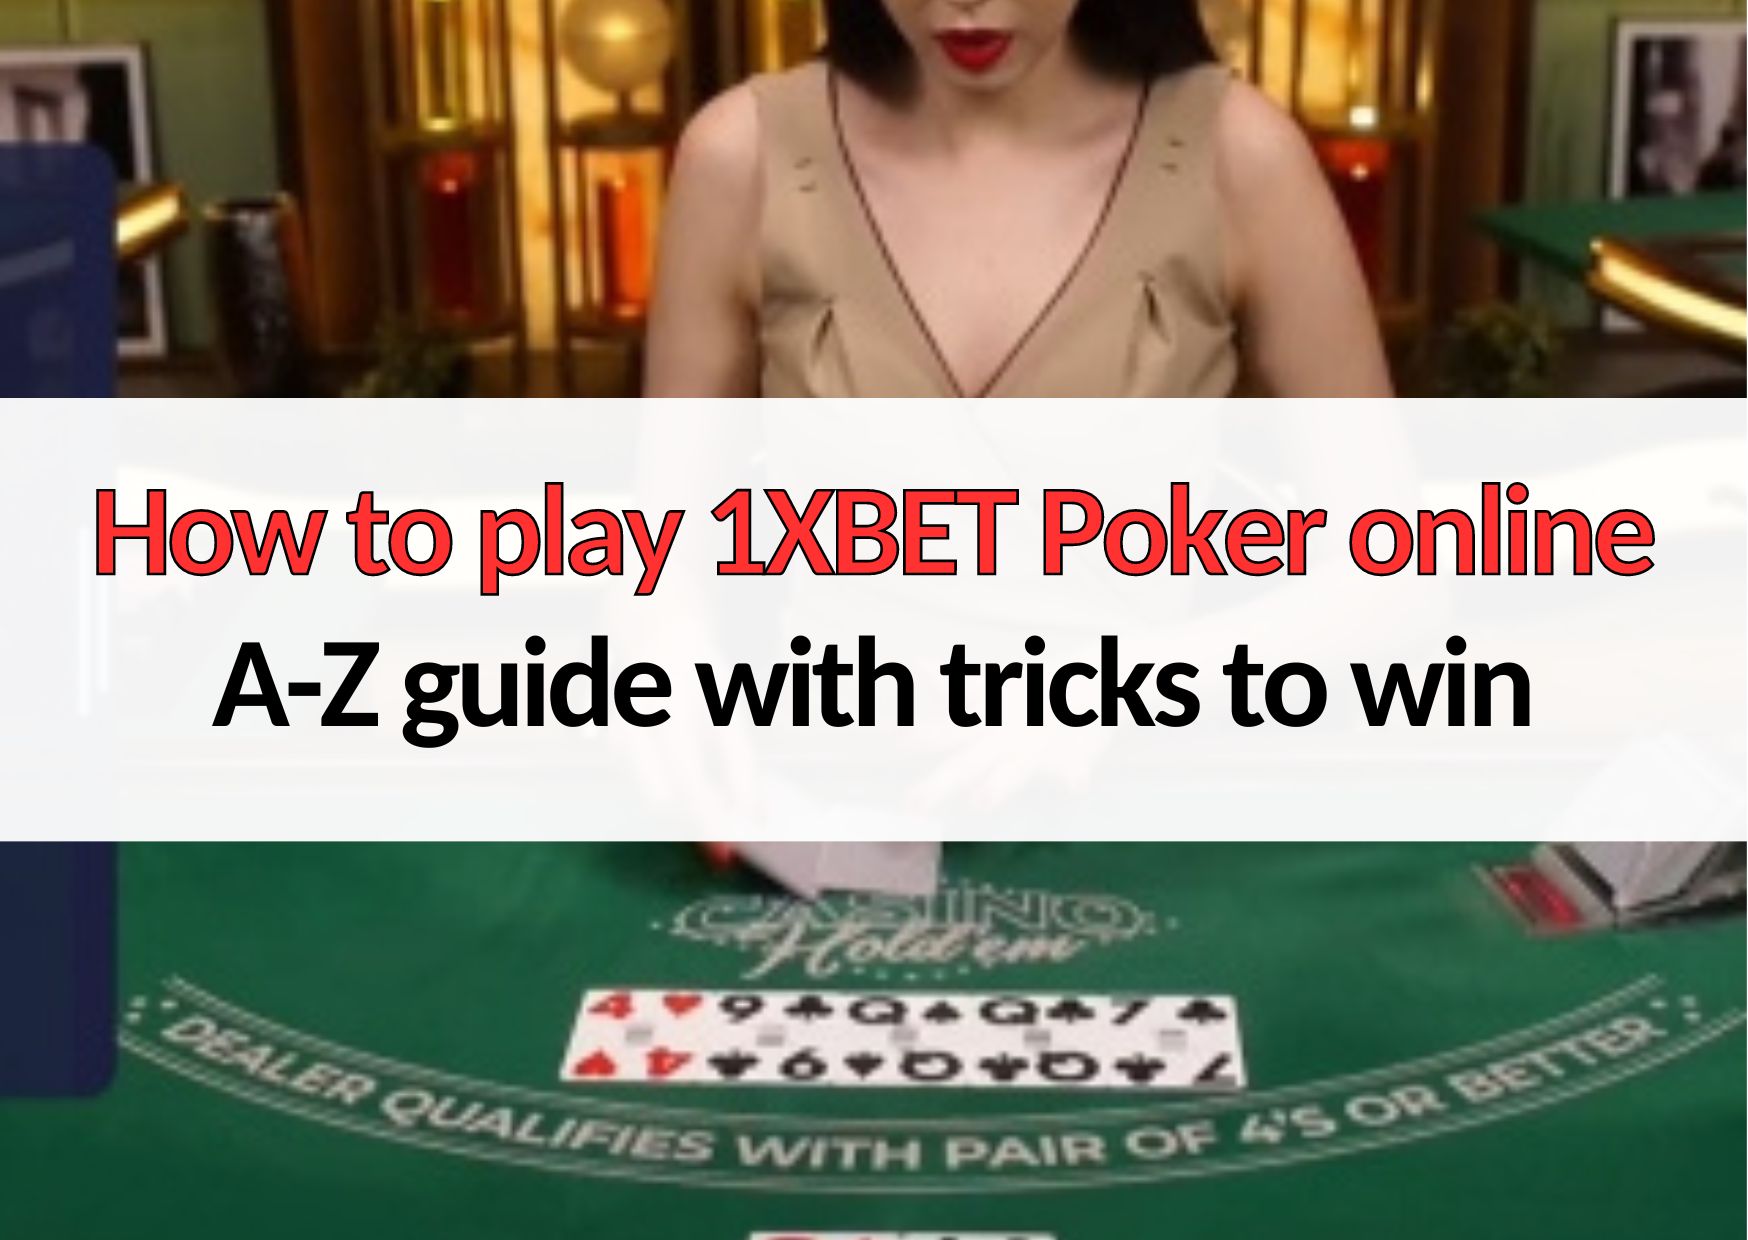 how to play 1xbet poker online beginners guide with tricks for winning